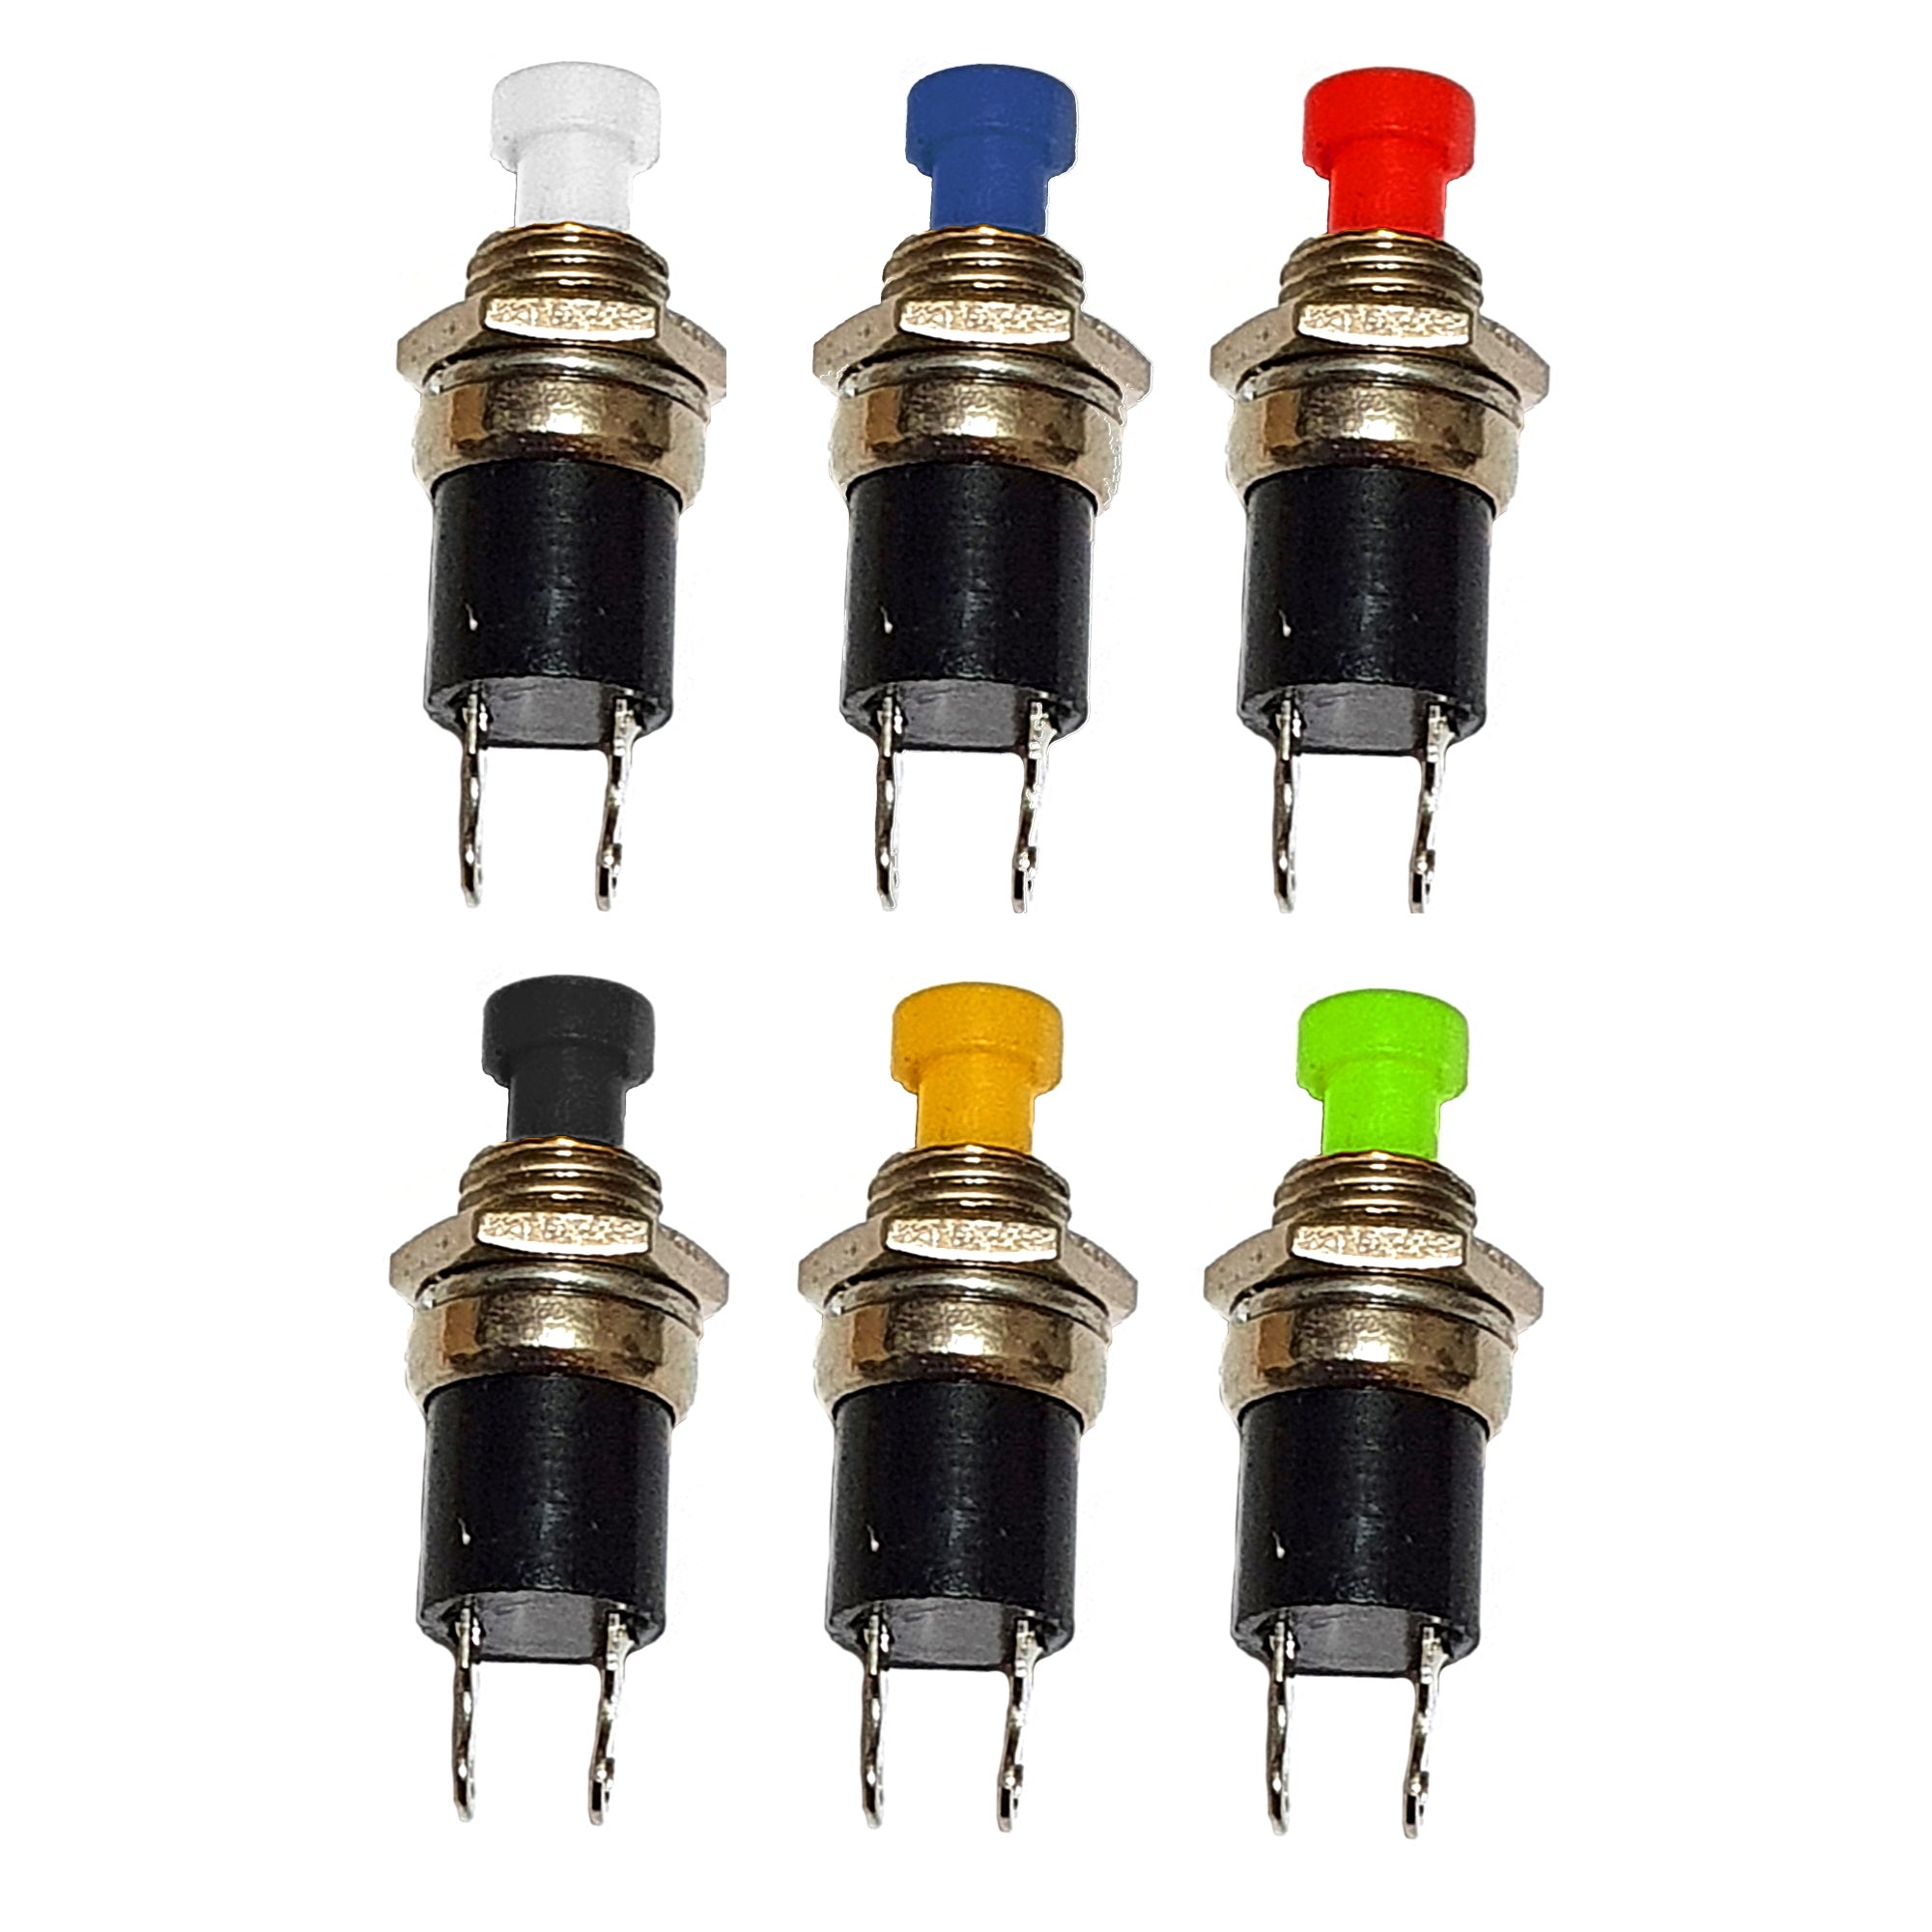 Miniature Push to make switches pack of 5 choose colour